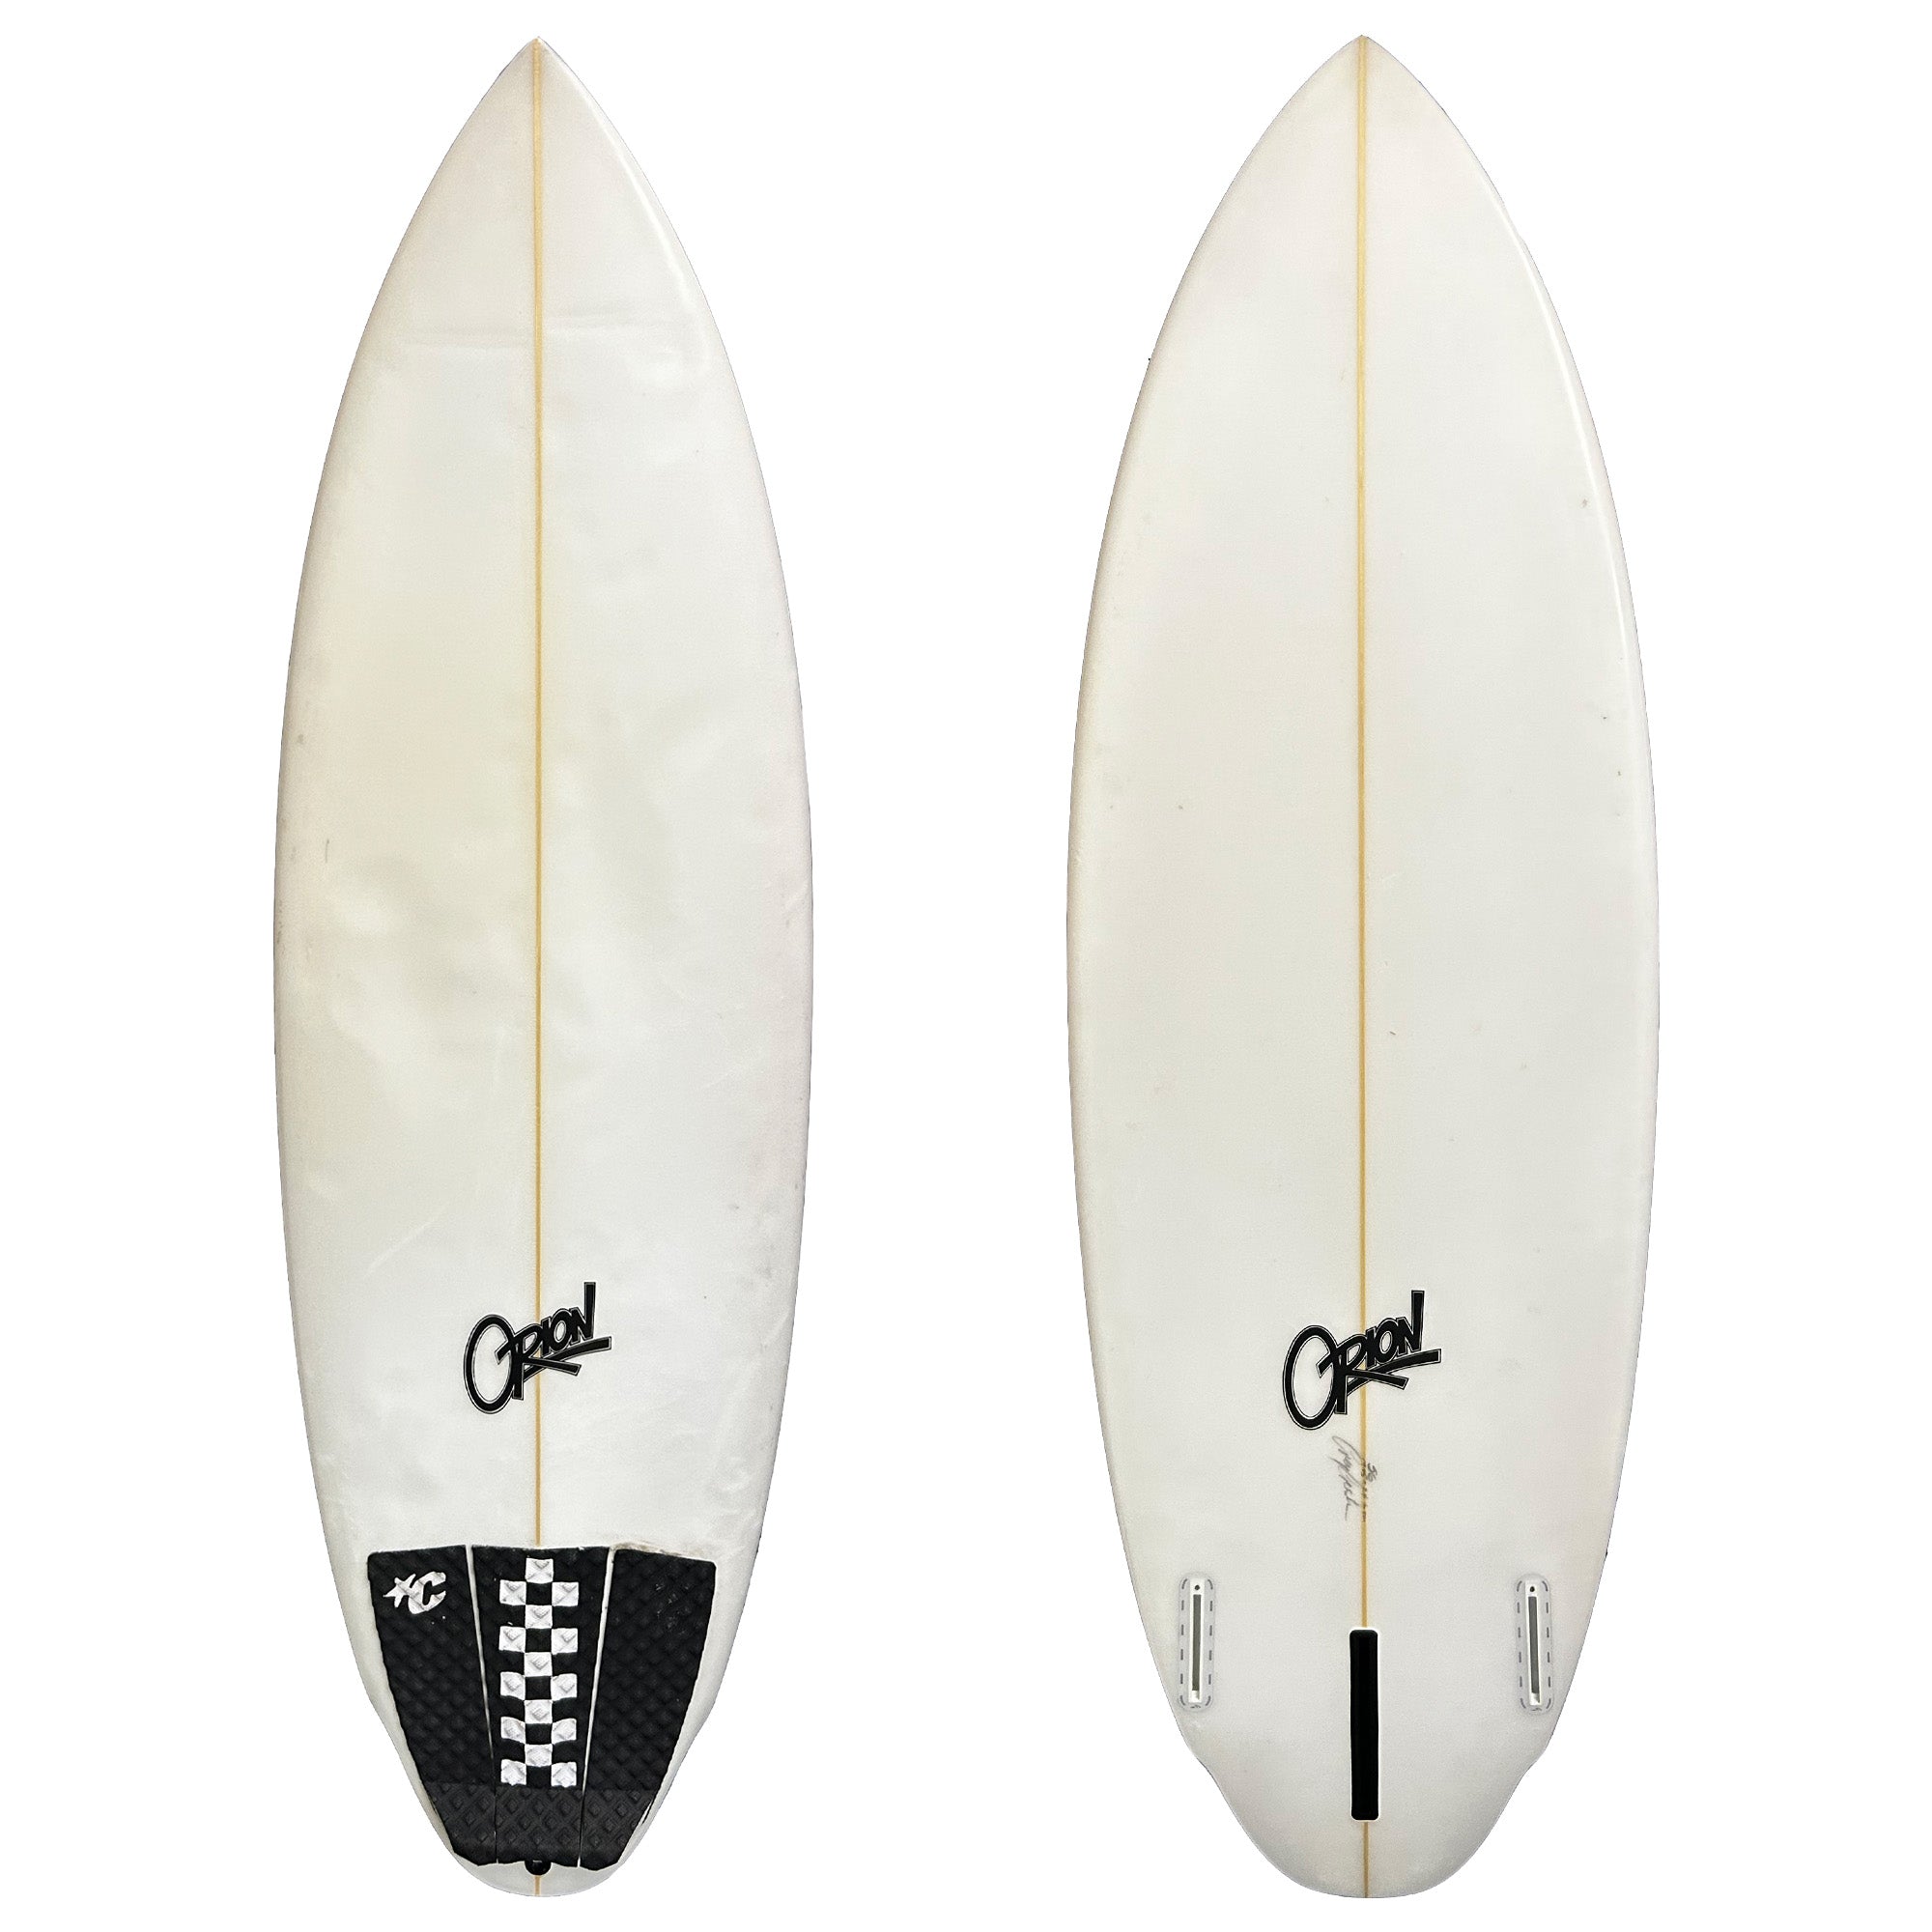 Orion 5'6 Used Surfboard